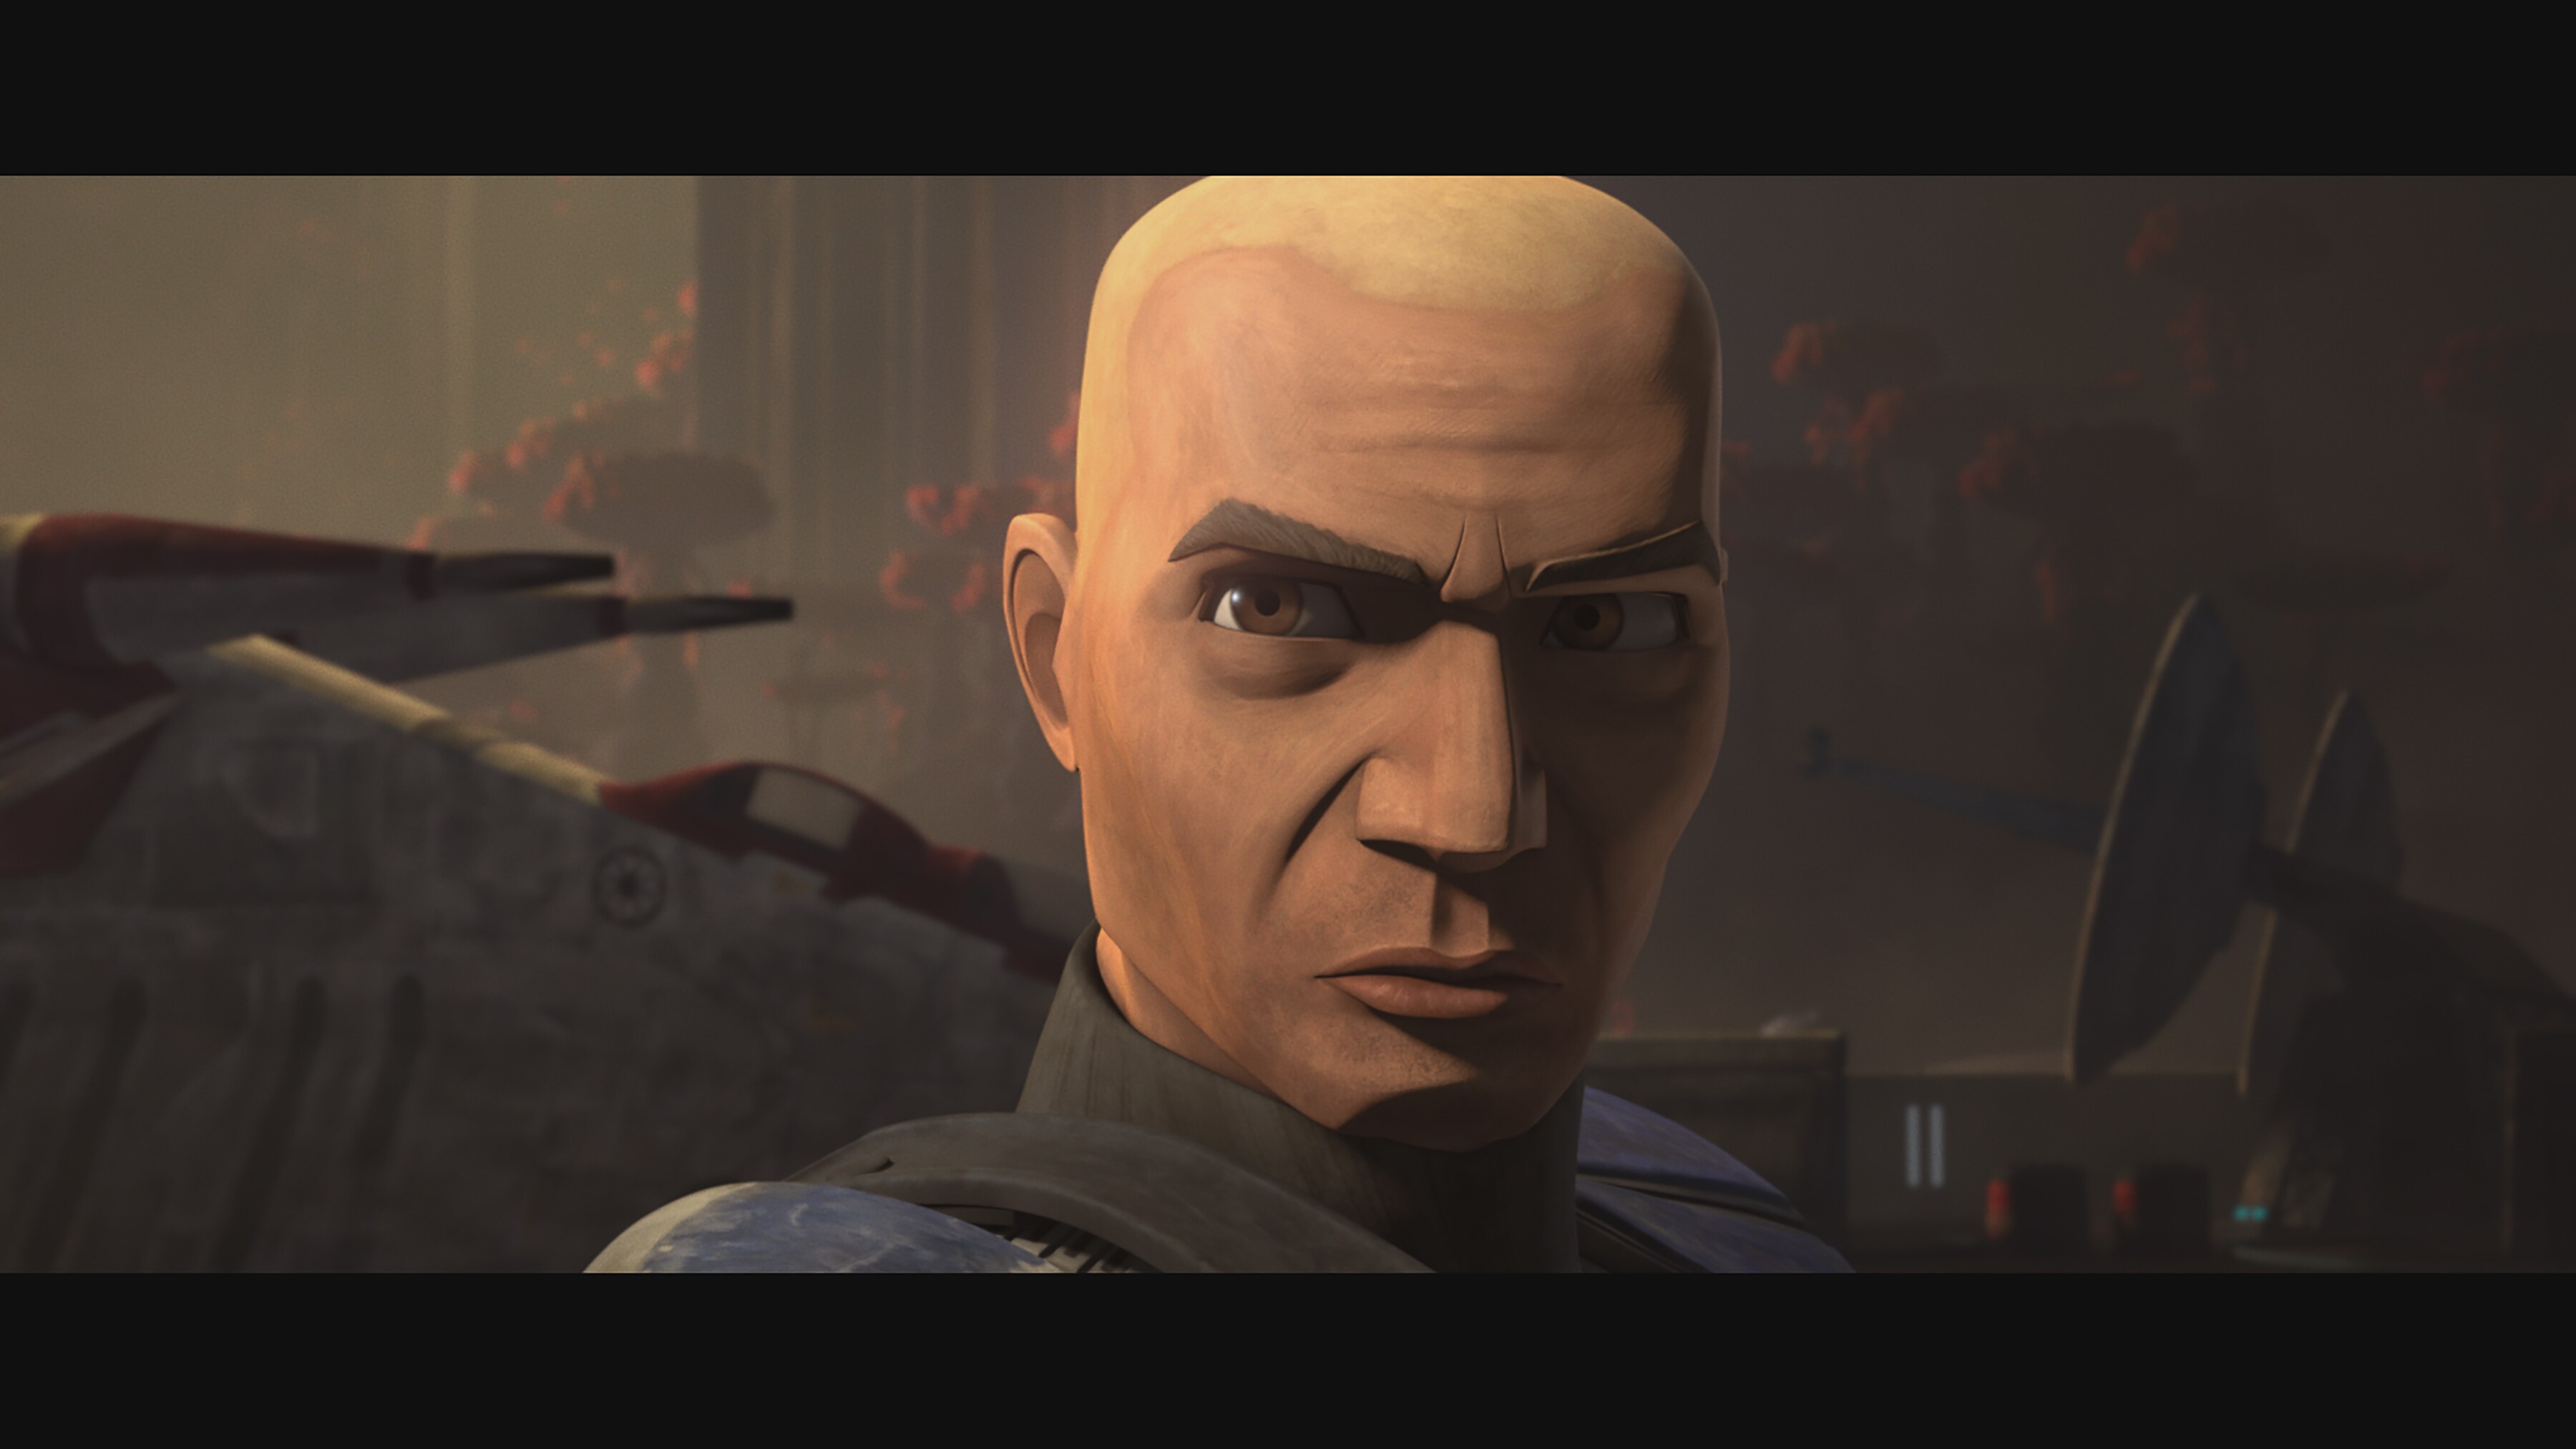 Clone Captain Rex in STAR WARS: THE CLONE WARS, exclusively on Disney+.